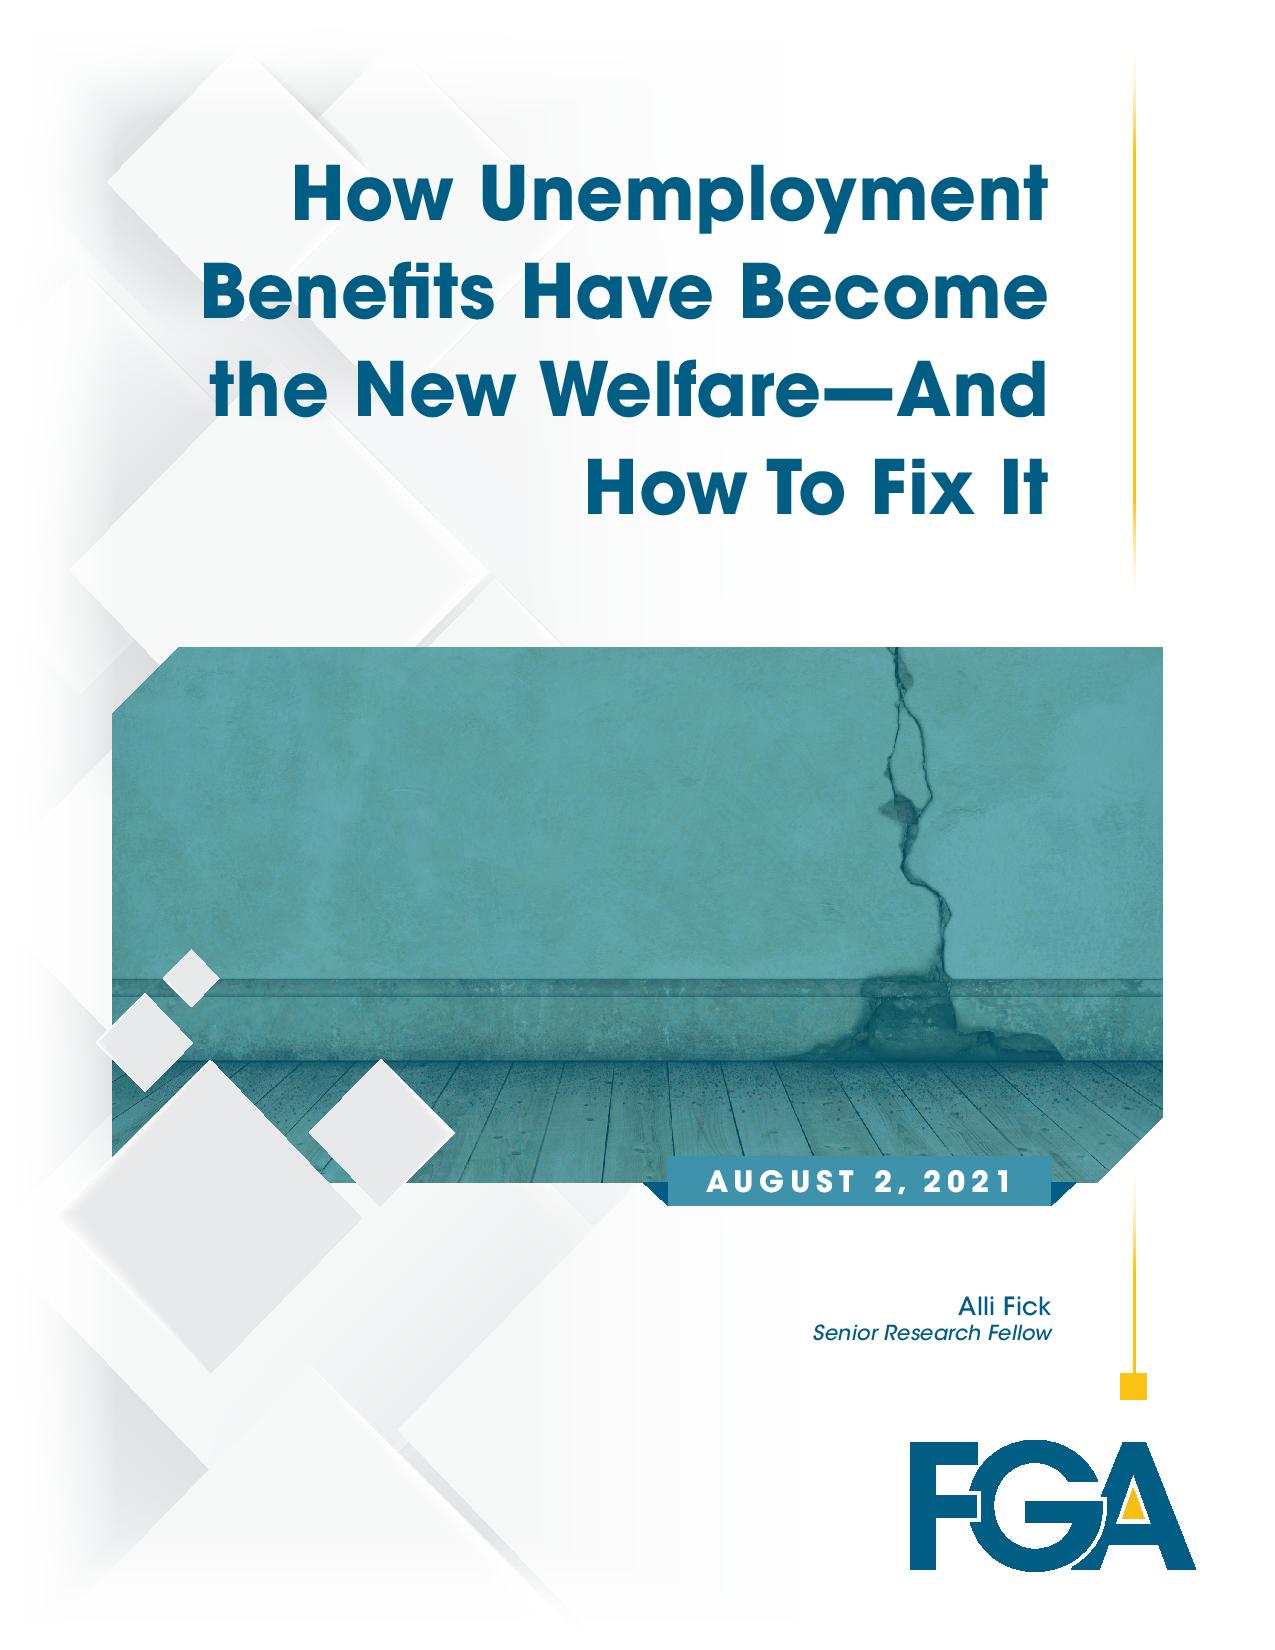 How Unemployment Benefits Have Become the New Welfare—And How To Fix It